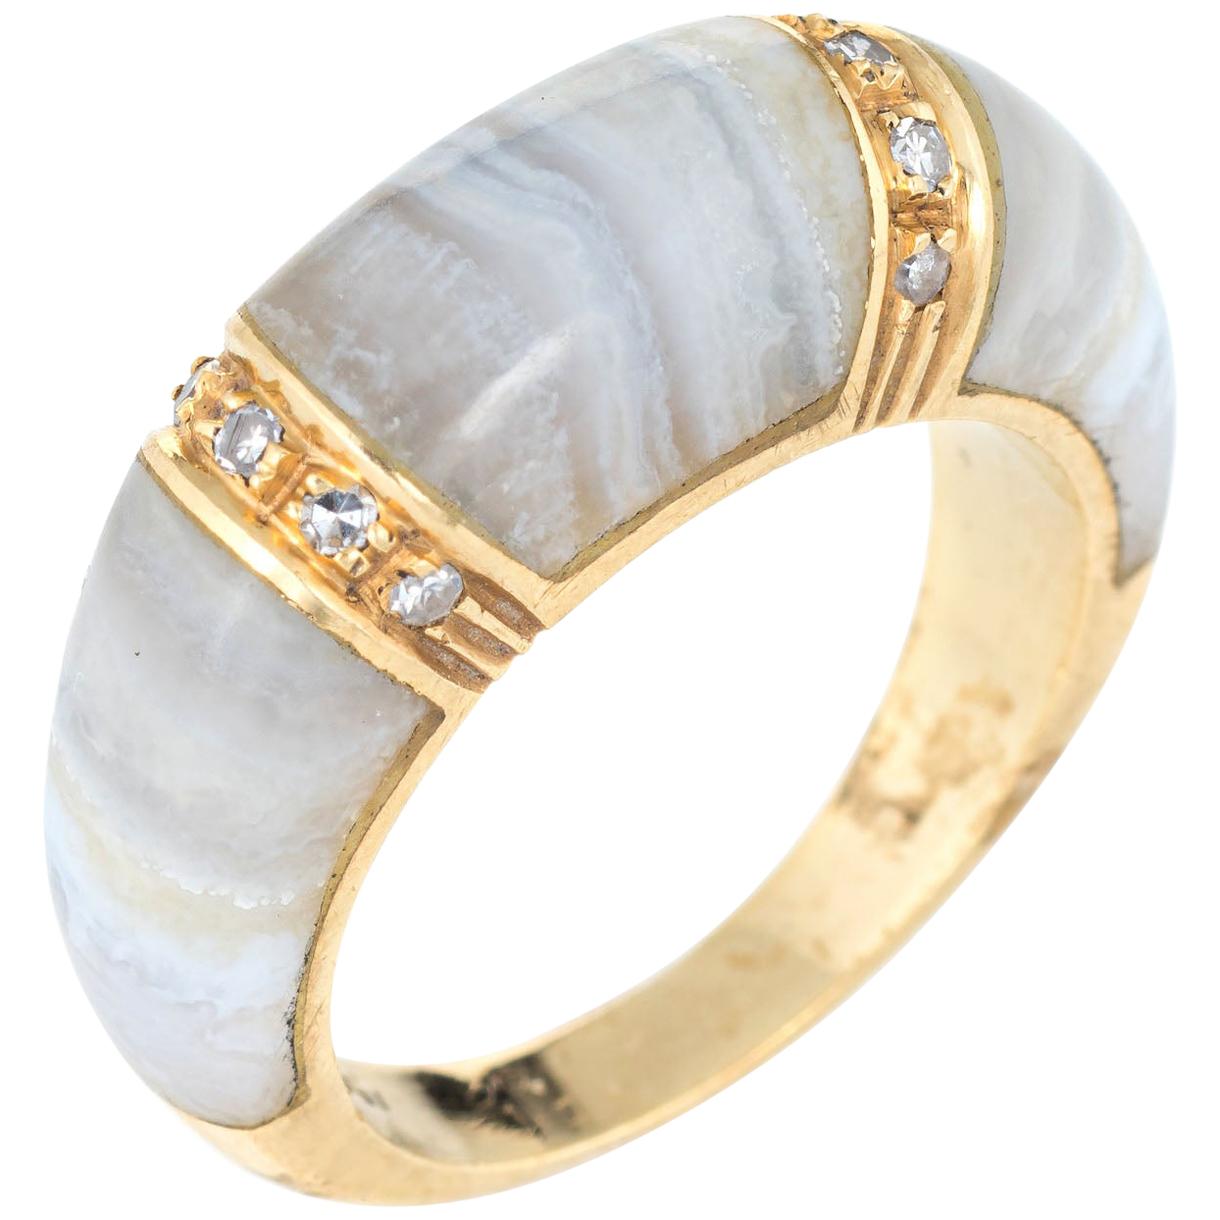 Banded Agate Diamond Ring 18 Karat Yellow Gold Dome Band Jewelry Stacking